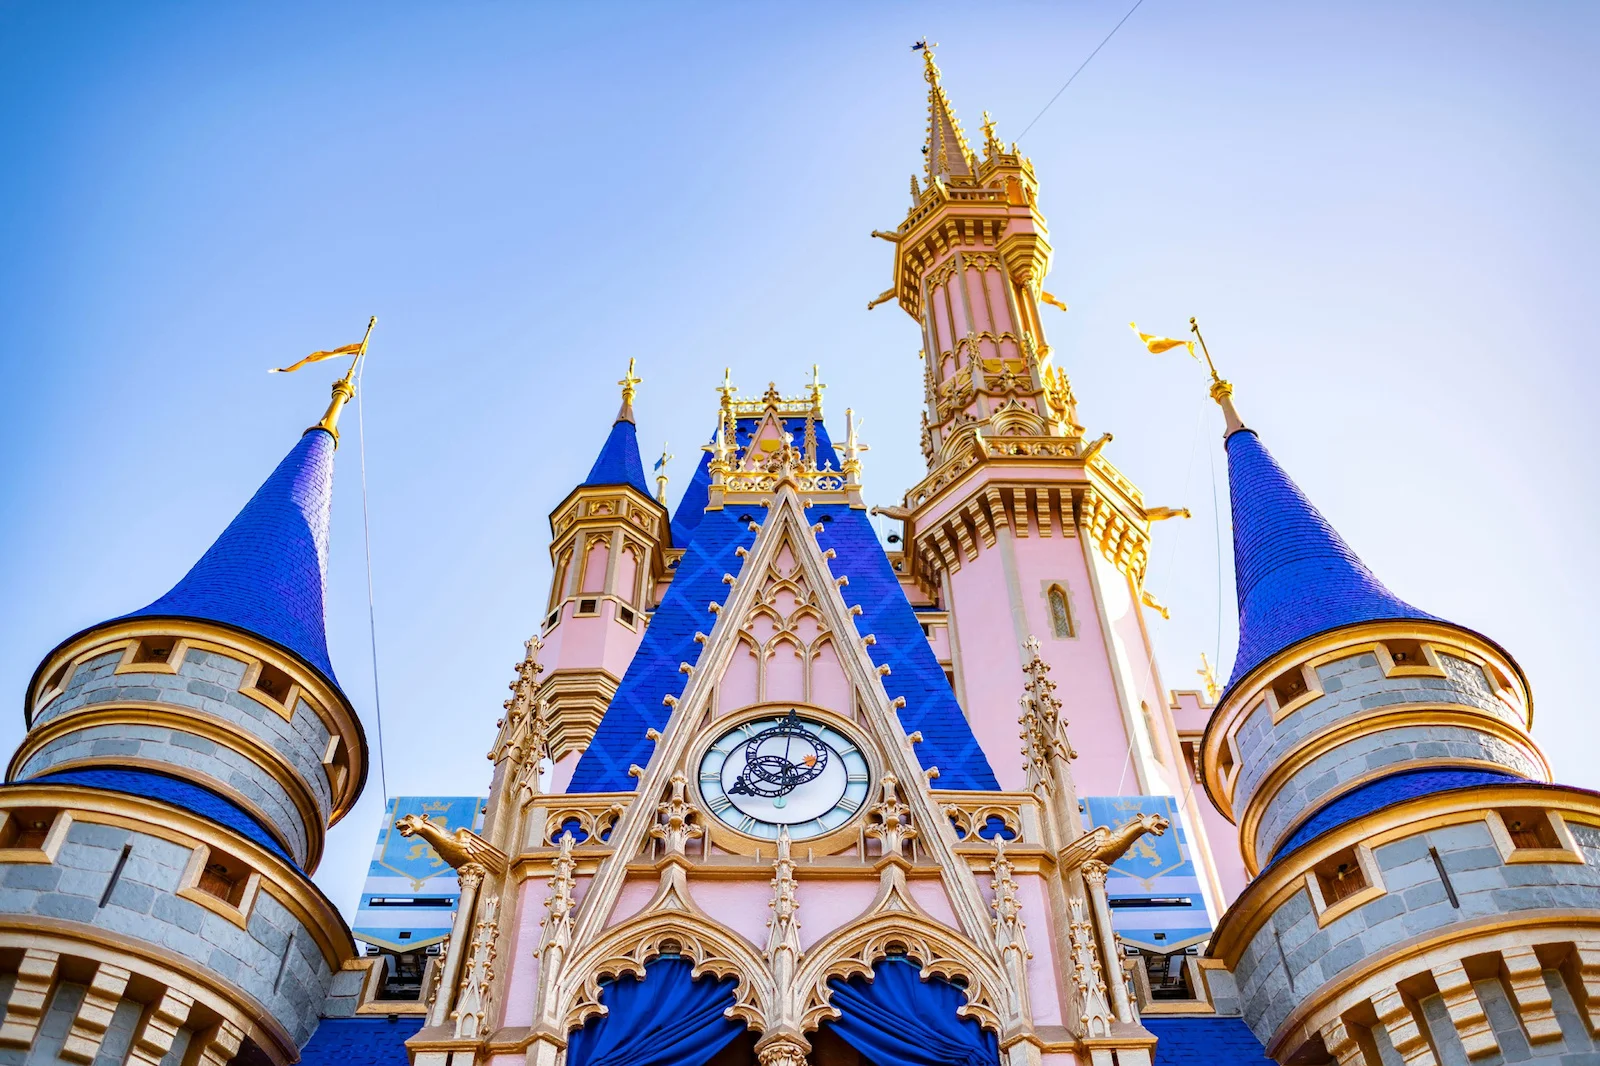 Disney Takes Strong Action Against Fake Disability Claims at Theme Parks